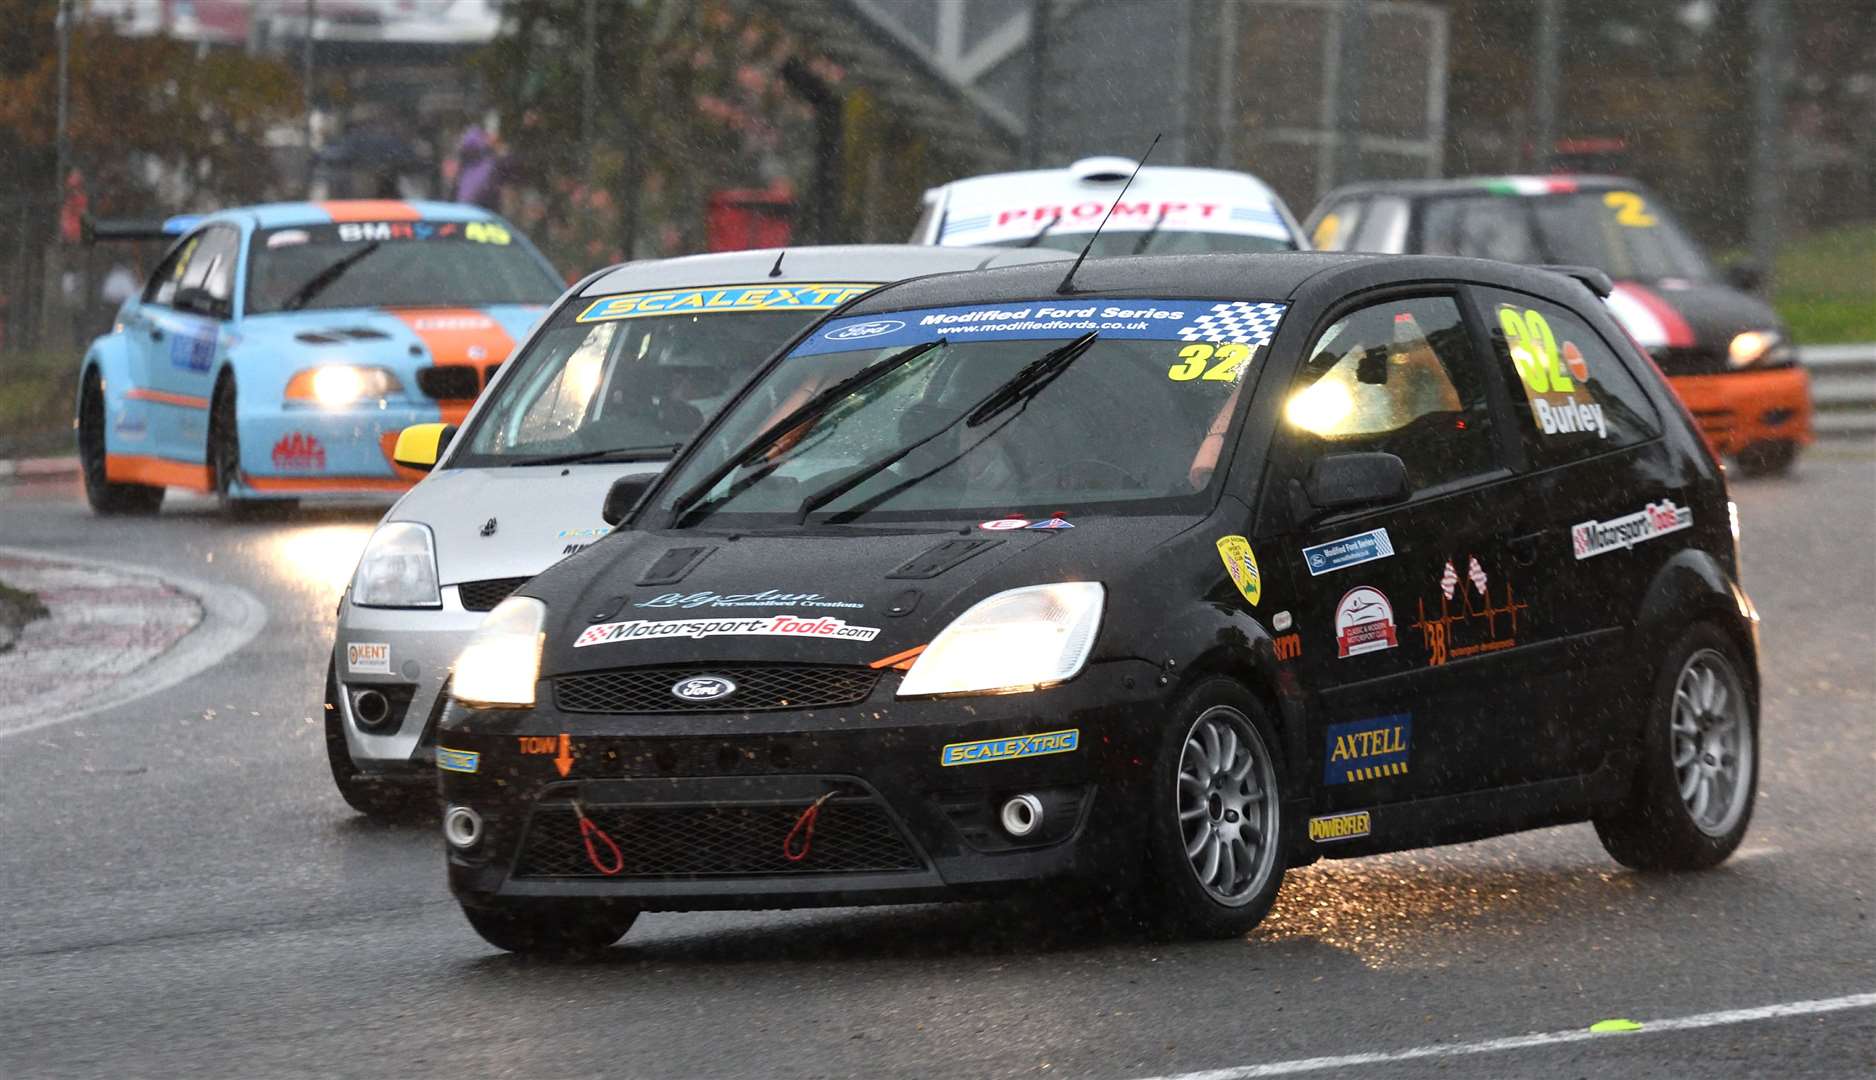 Chris Burley, from Ashford, twice finished third in class in the Super Saloons races in his Ford Fiesta ST